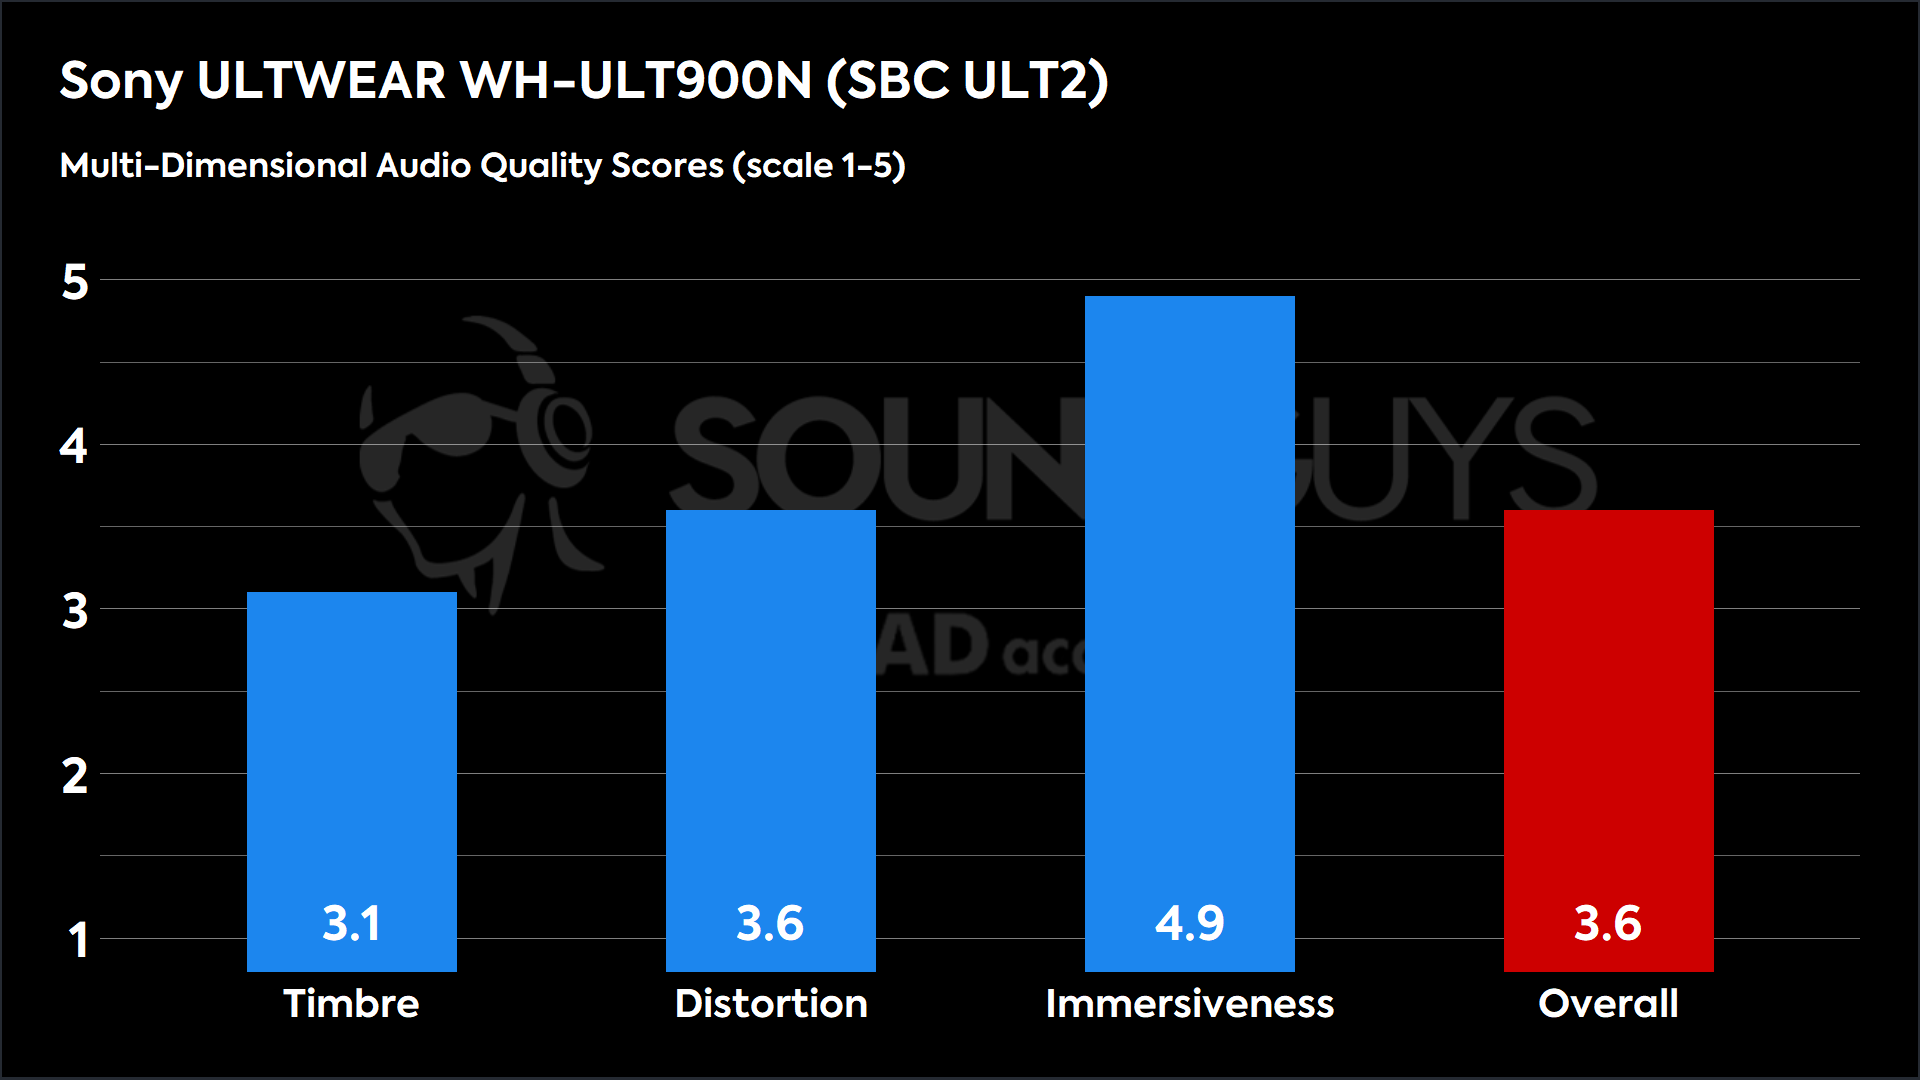 This chart shows the MDAQS results for the Sony ULTWEAR WH-ULT900N in SBC ULT2 mode. The Timbre score is 3.1, The Distortion score is 3.6, the Immersiveness score is 4.9, and the Overall Score is 3.6).